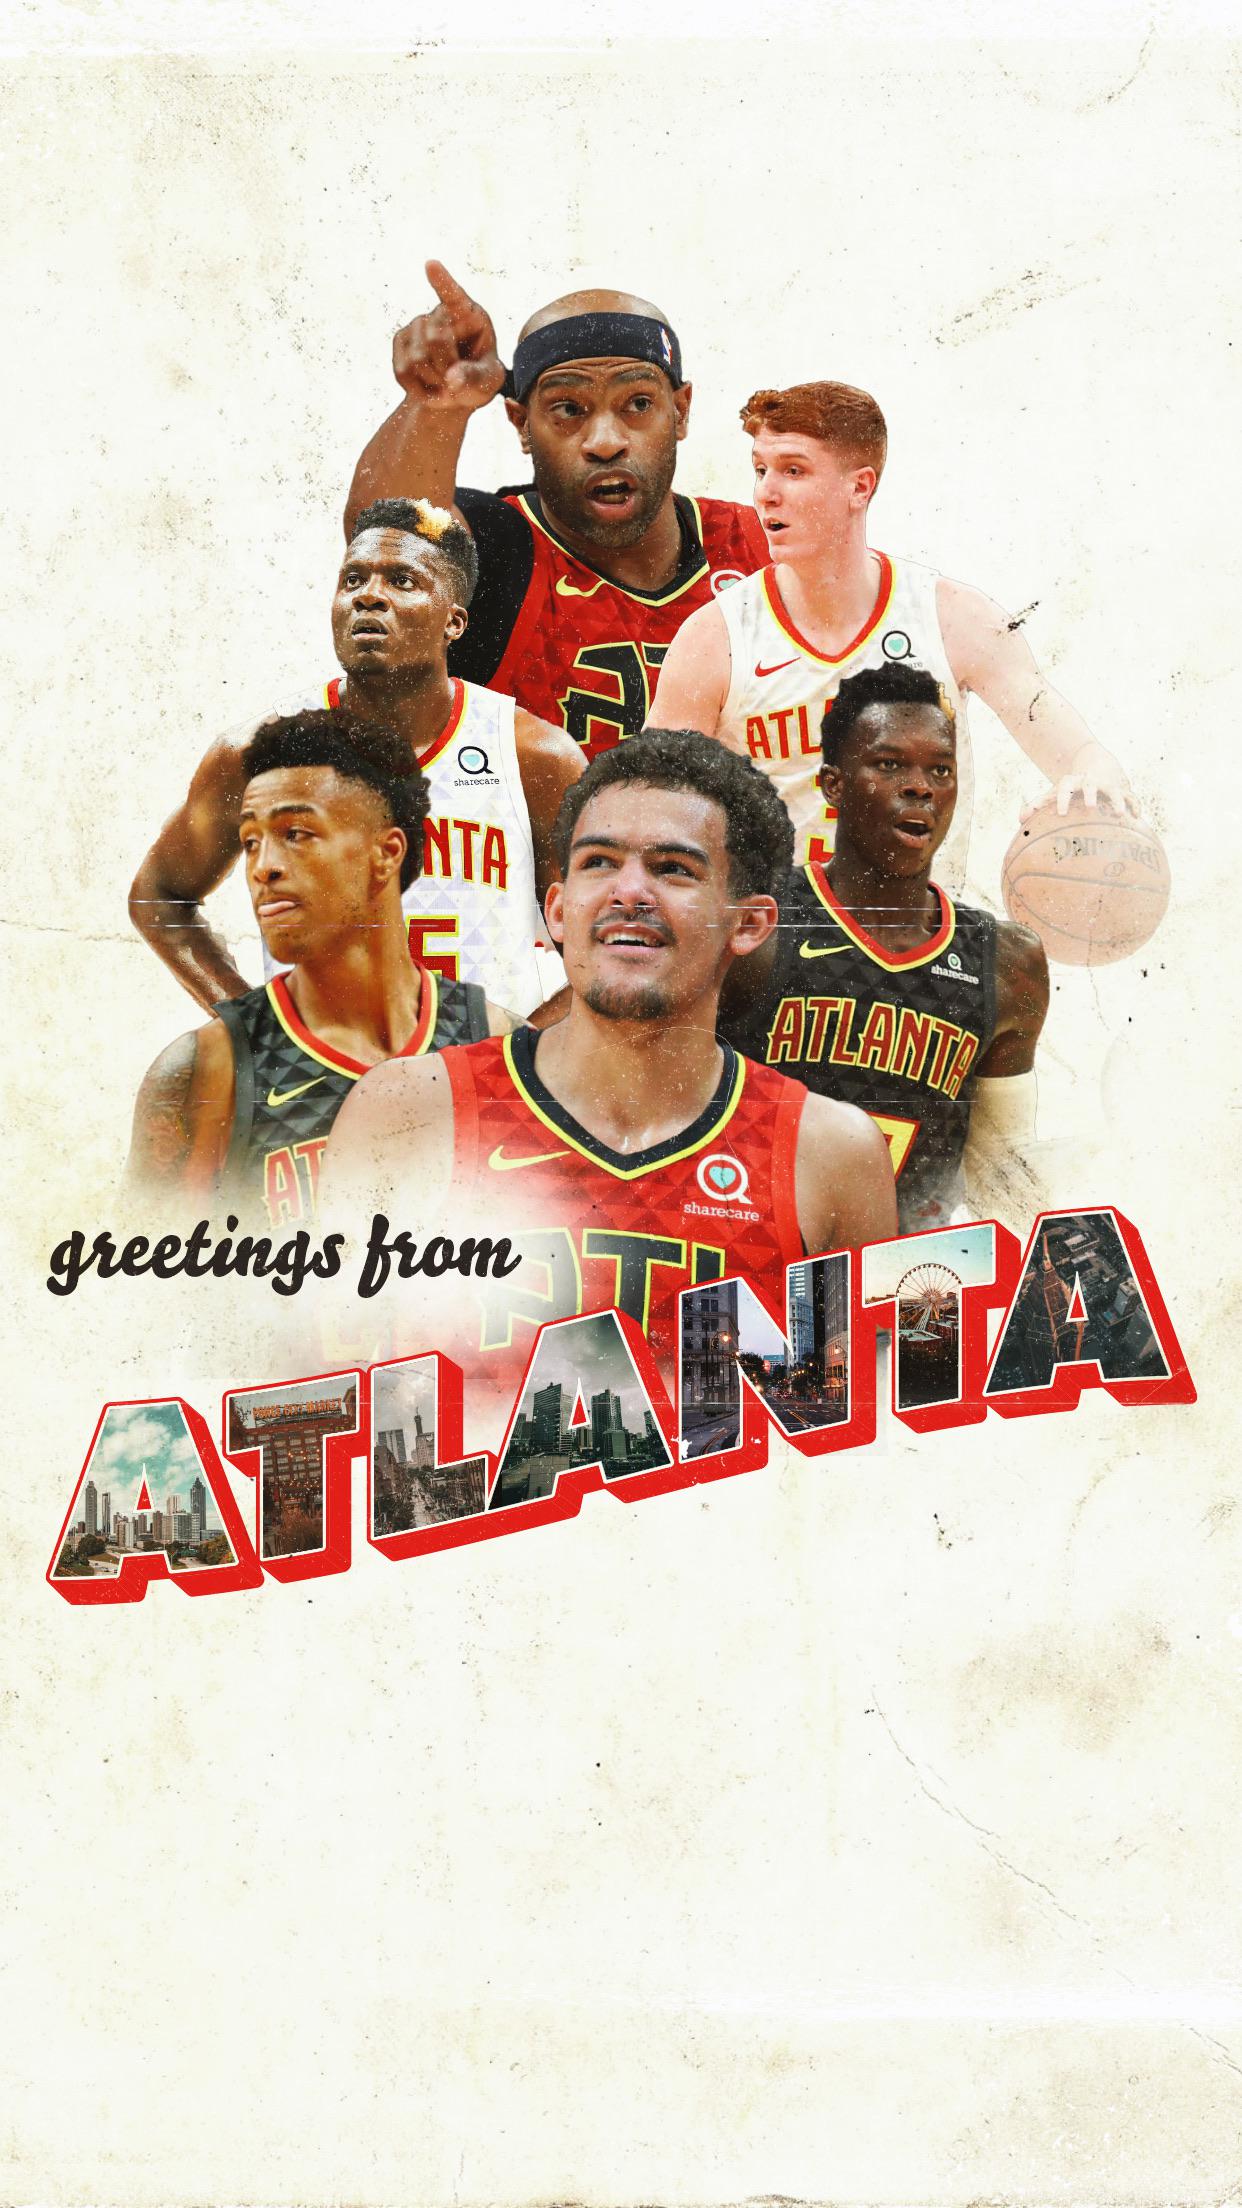 Just made a hawks wallpaper! Any feedback or suggestions are appreciated!